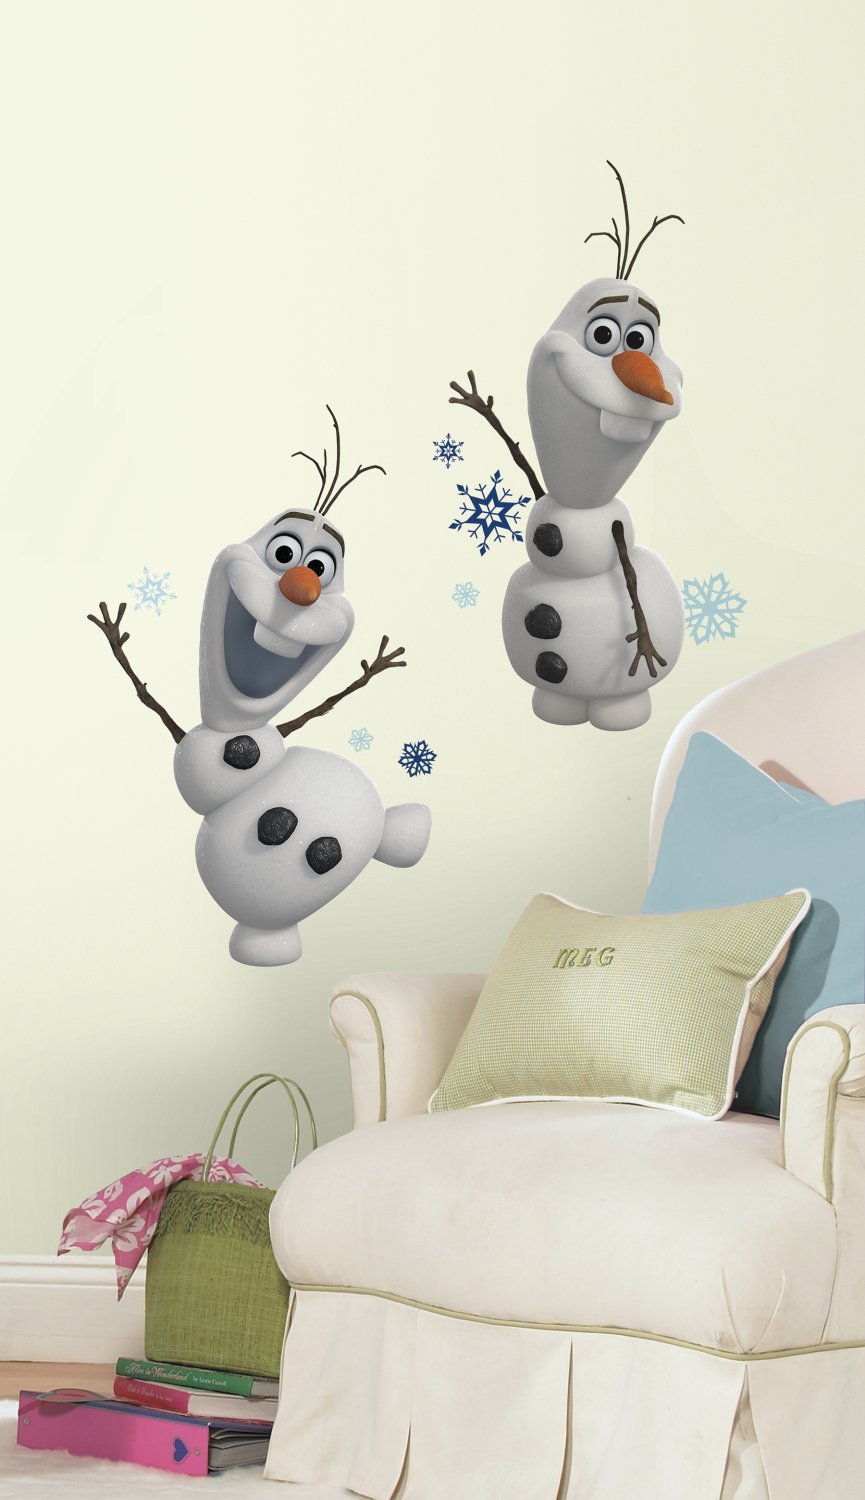 Frozen Olaf The Snow Man Peel And Stick Wall Decals, 25 Count, 1-Pack Only $8.10 (Reg. $13.99)